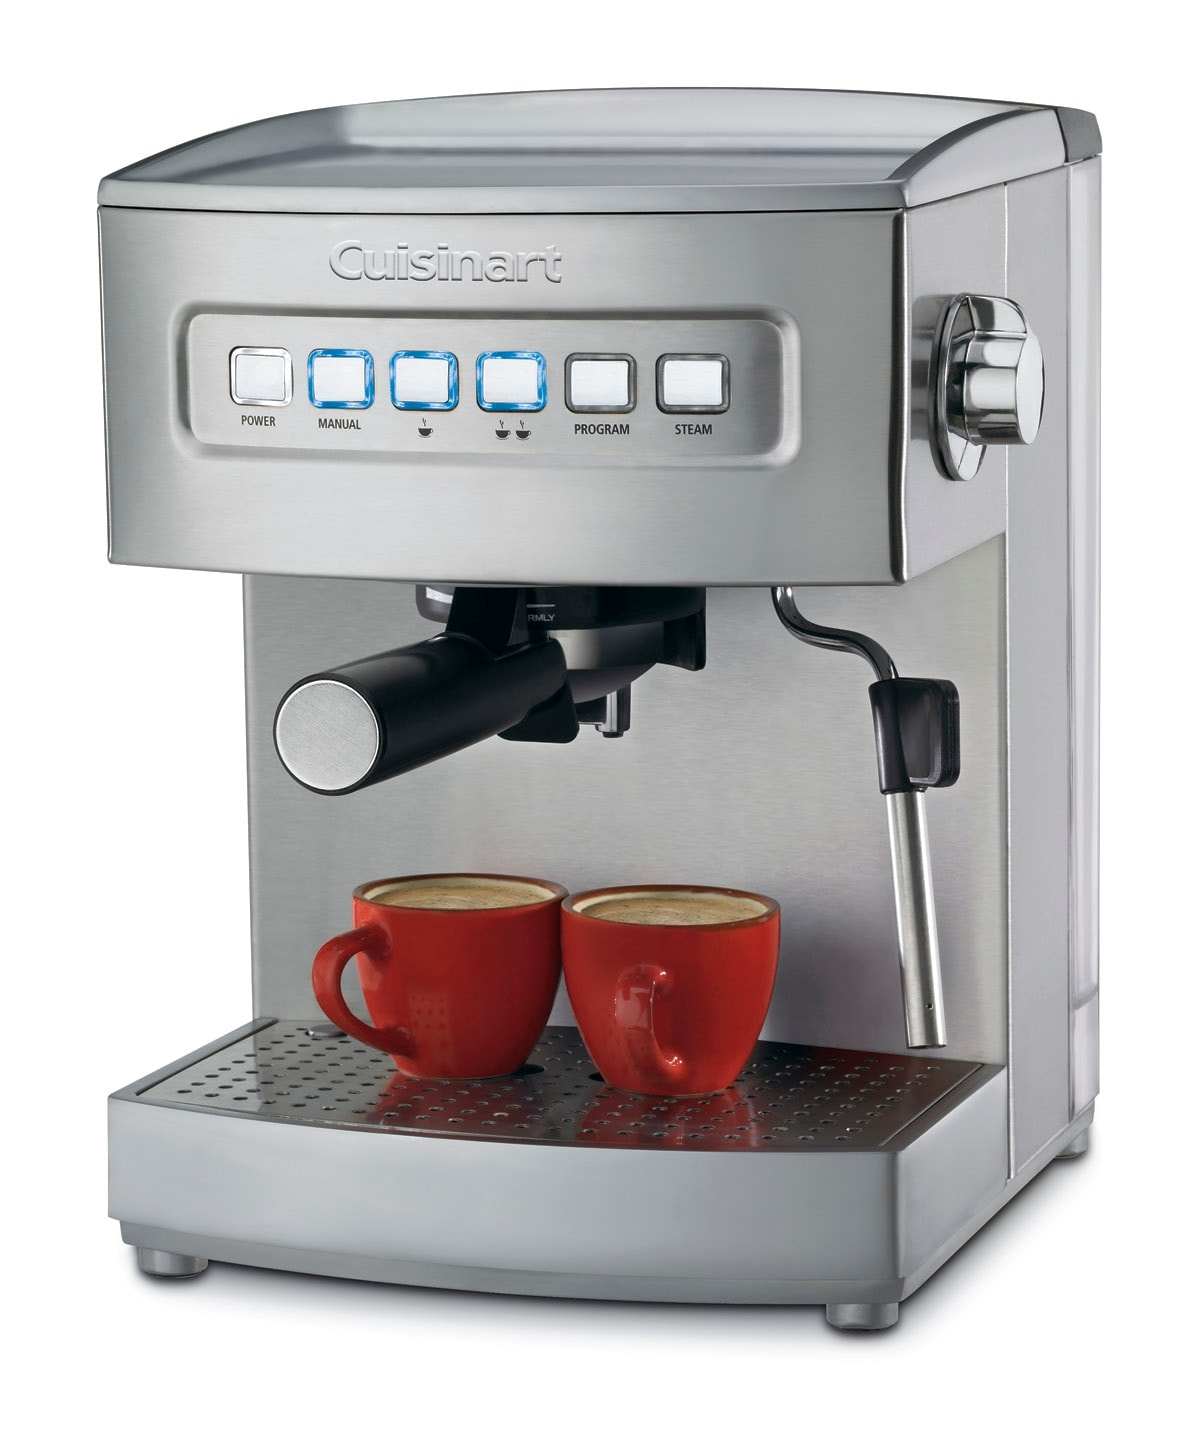 Chefwave Espresso Machine for Nespresso Compatible capsule Stainless Steel  Automatic Programmable Espresso Machine in the Espresso Machines department  at